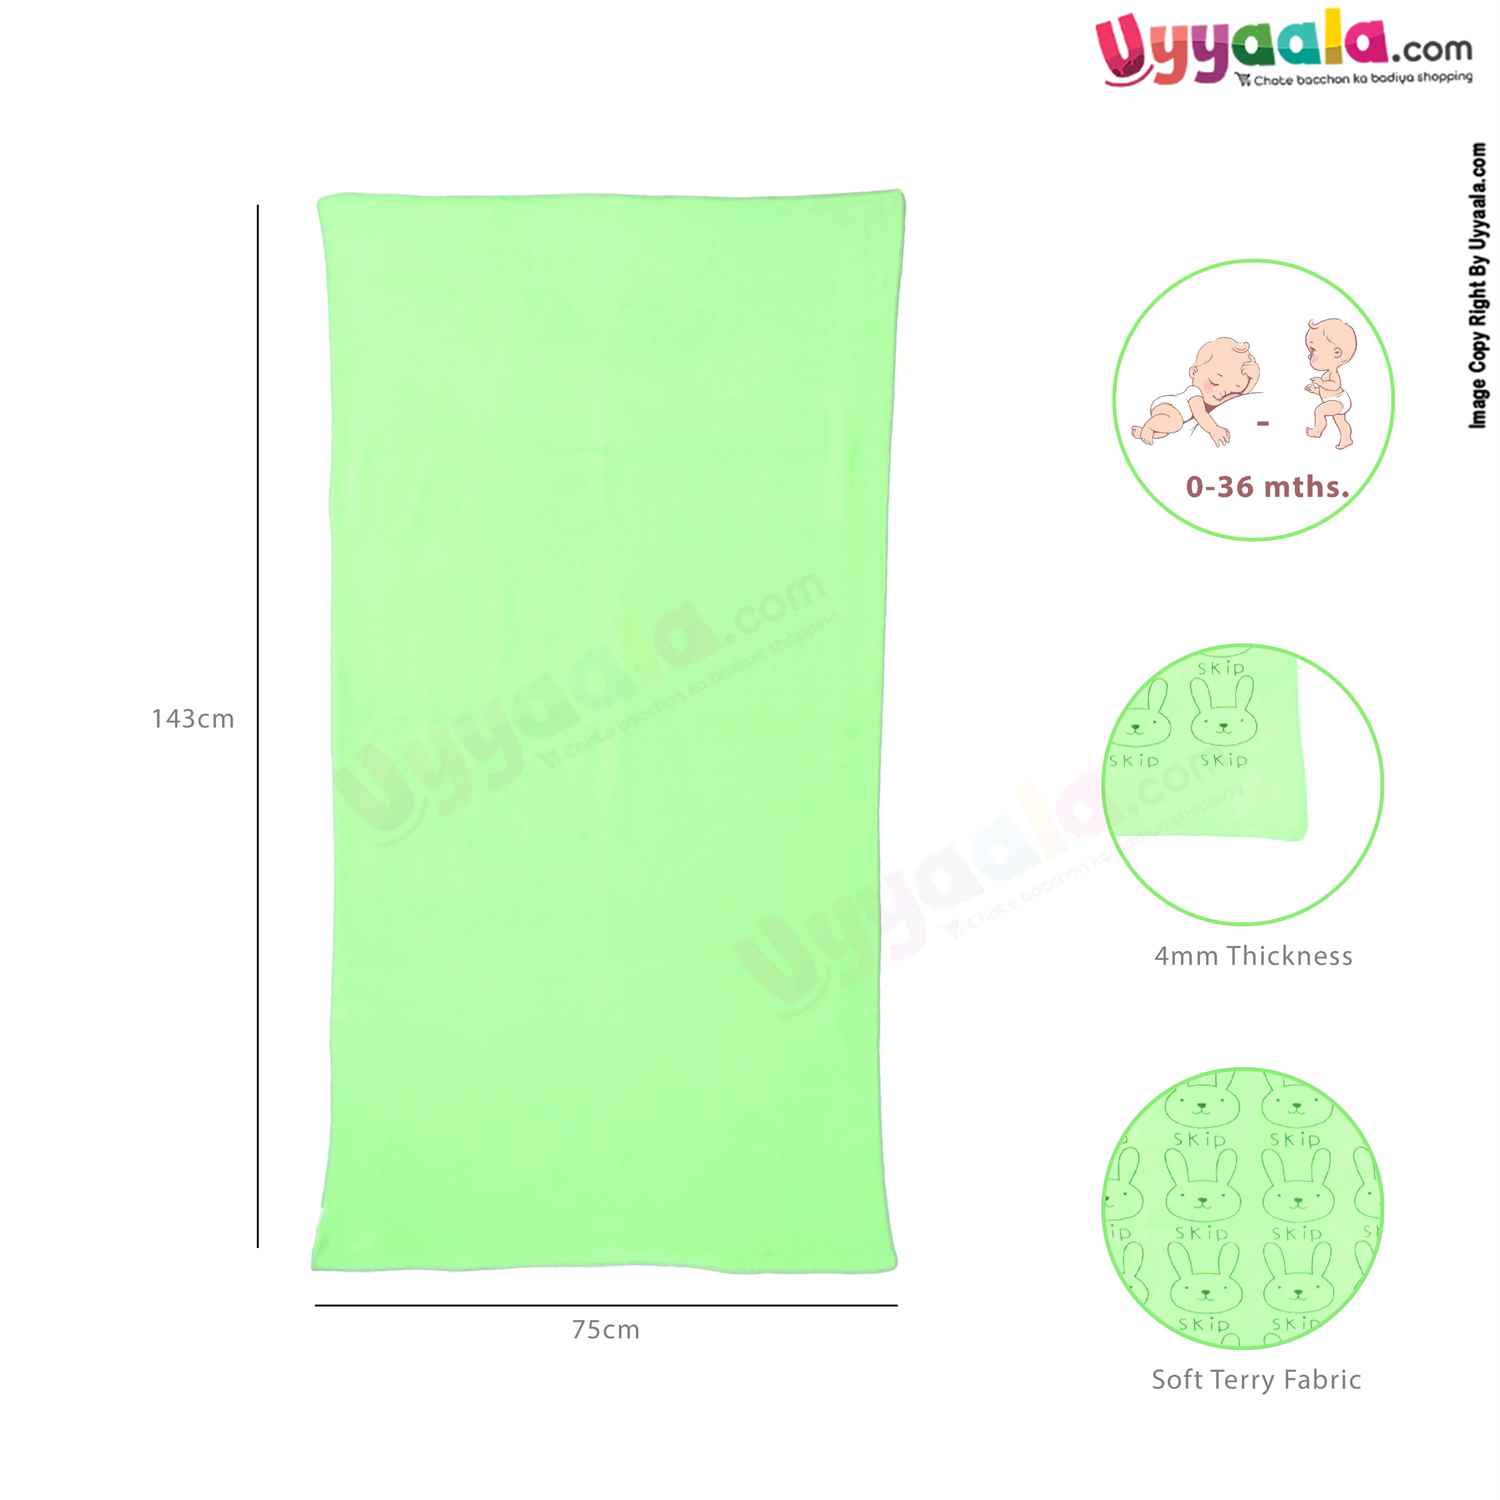 Soft Terry Bath Towel Premium with Rabbit Print for Babies 0-36m Age, Size (143*75cm)- Green